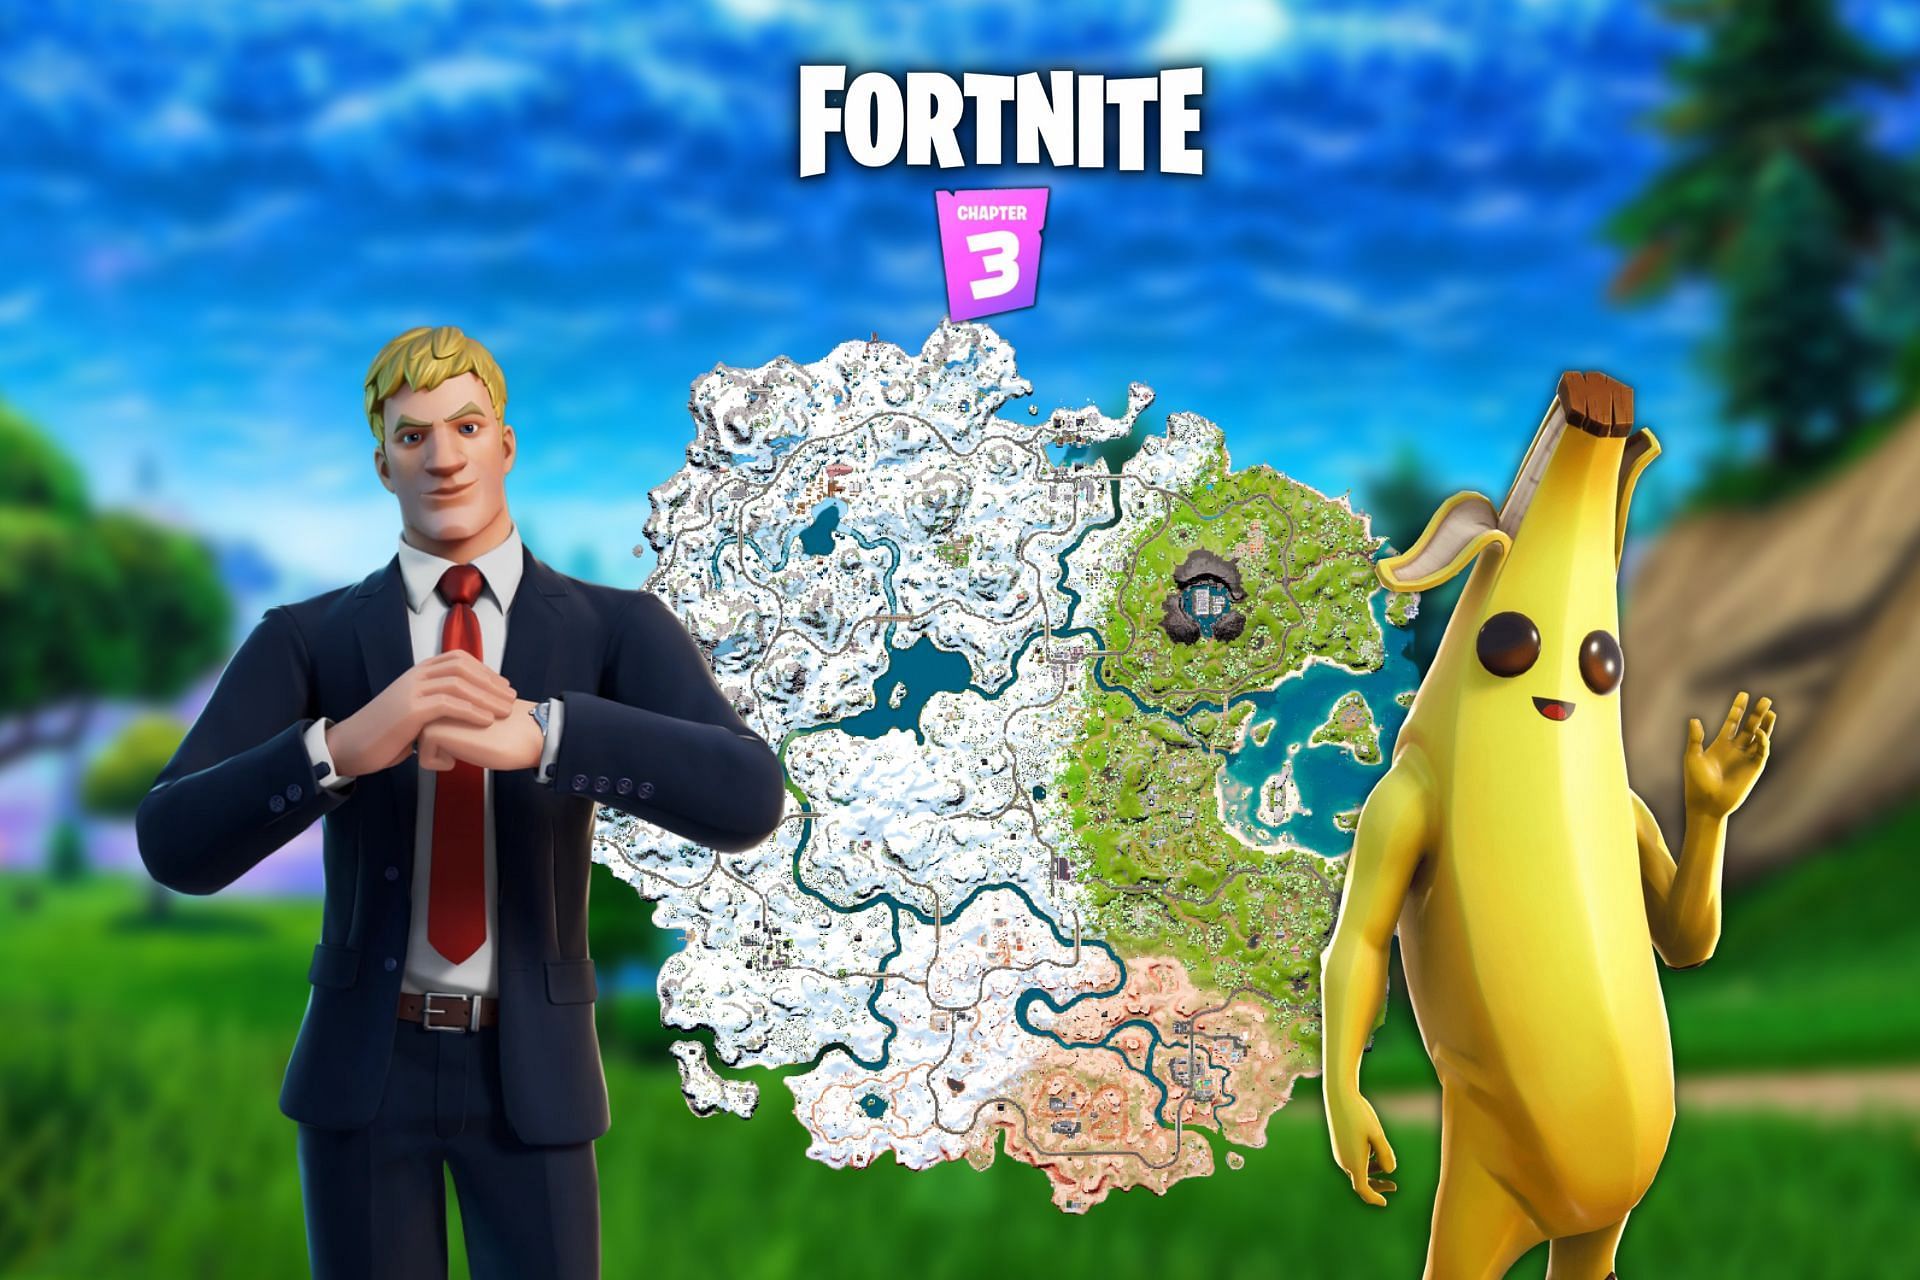 when can we play fortnite chapter 3 , when is chapter 3 fortnite